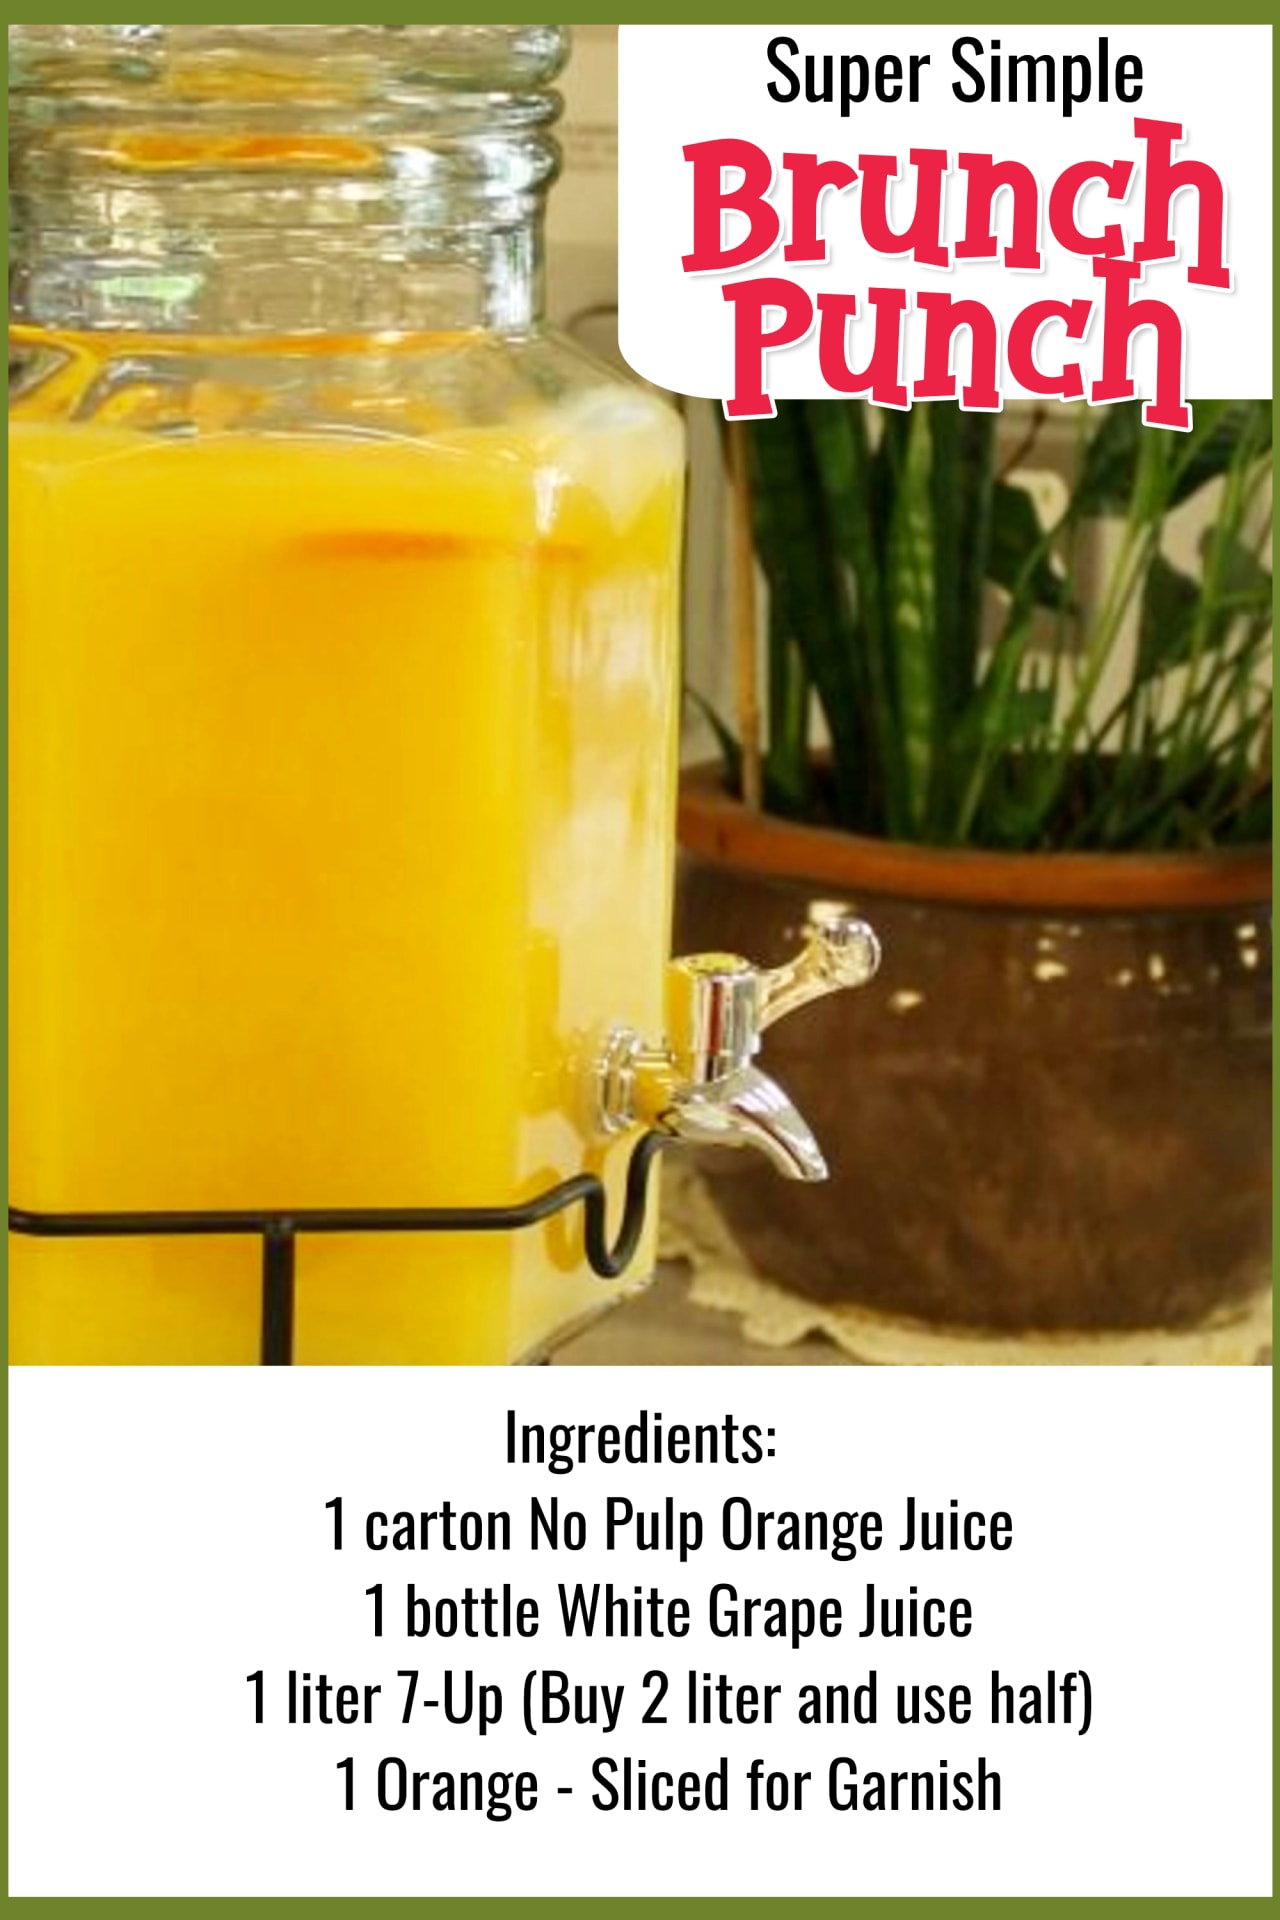 Easy Brunch Punch Recipe for a crowd - Easy Punch Recipes for a Crowd and Inexpensive Party Drinks Ideas - Cranberry Vodka Punch, Pineapple Orange Juice Alcoholic Drinks, Punch for 50 and Simple Punch Recipes for a Crowd, Party, Brunch, Cookout or Bridal Shower - non-alcoholic punch recipes and simple alcoholic punch recipes, non-alcoholic holiday punch, easy fruit punch recipes, easy punch recipes with sprite and pineapple juice, jungle juice recipe with fruit